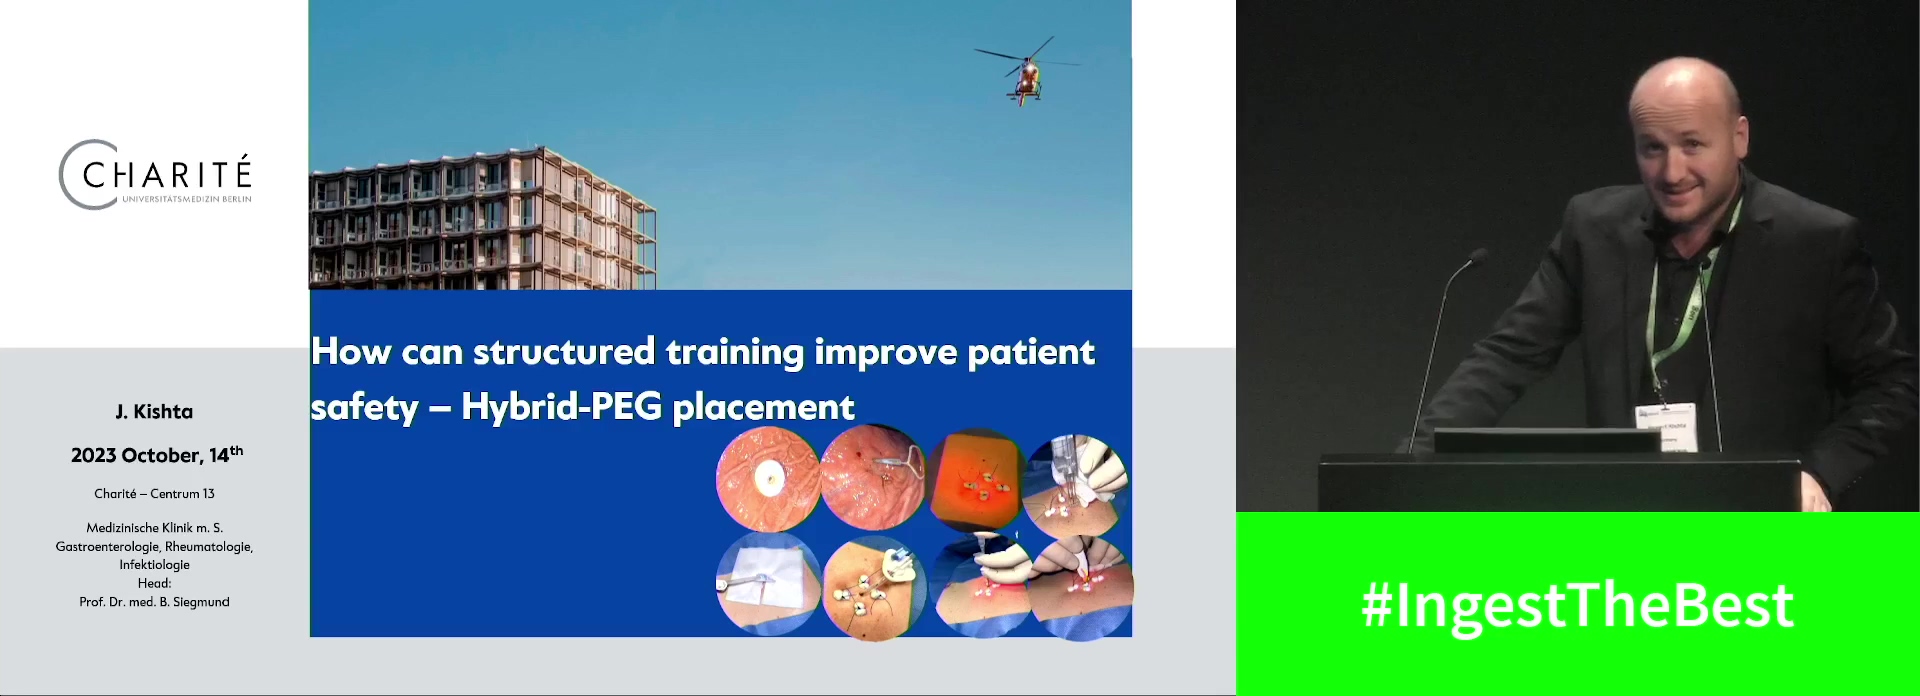 How can a structured training improve patient safety: Hybrid-PEG placement